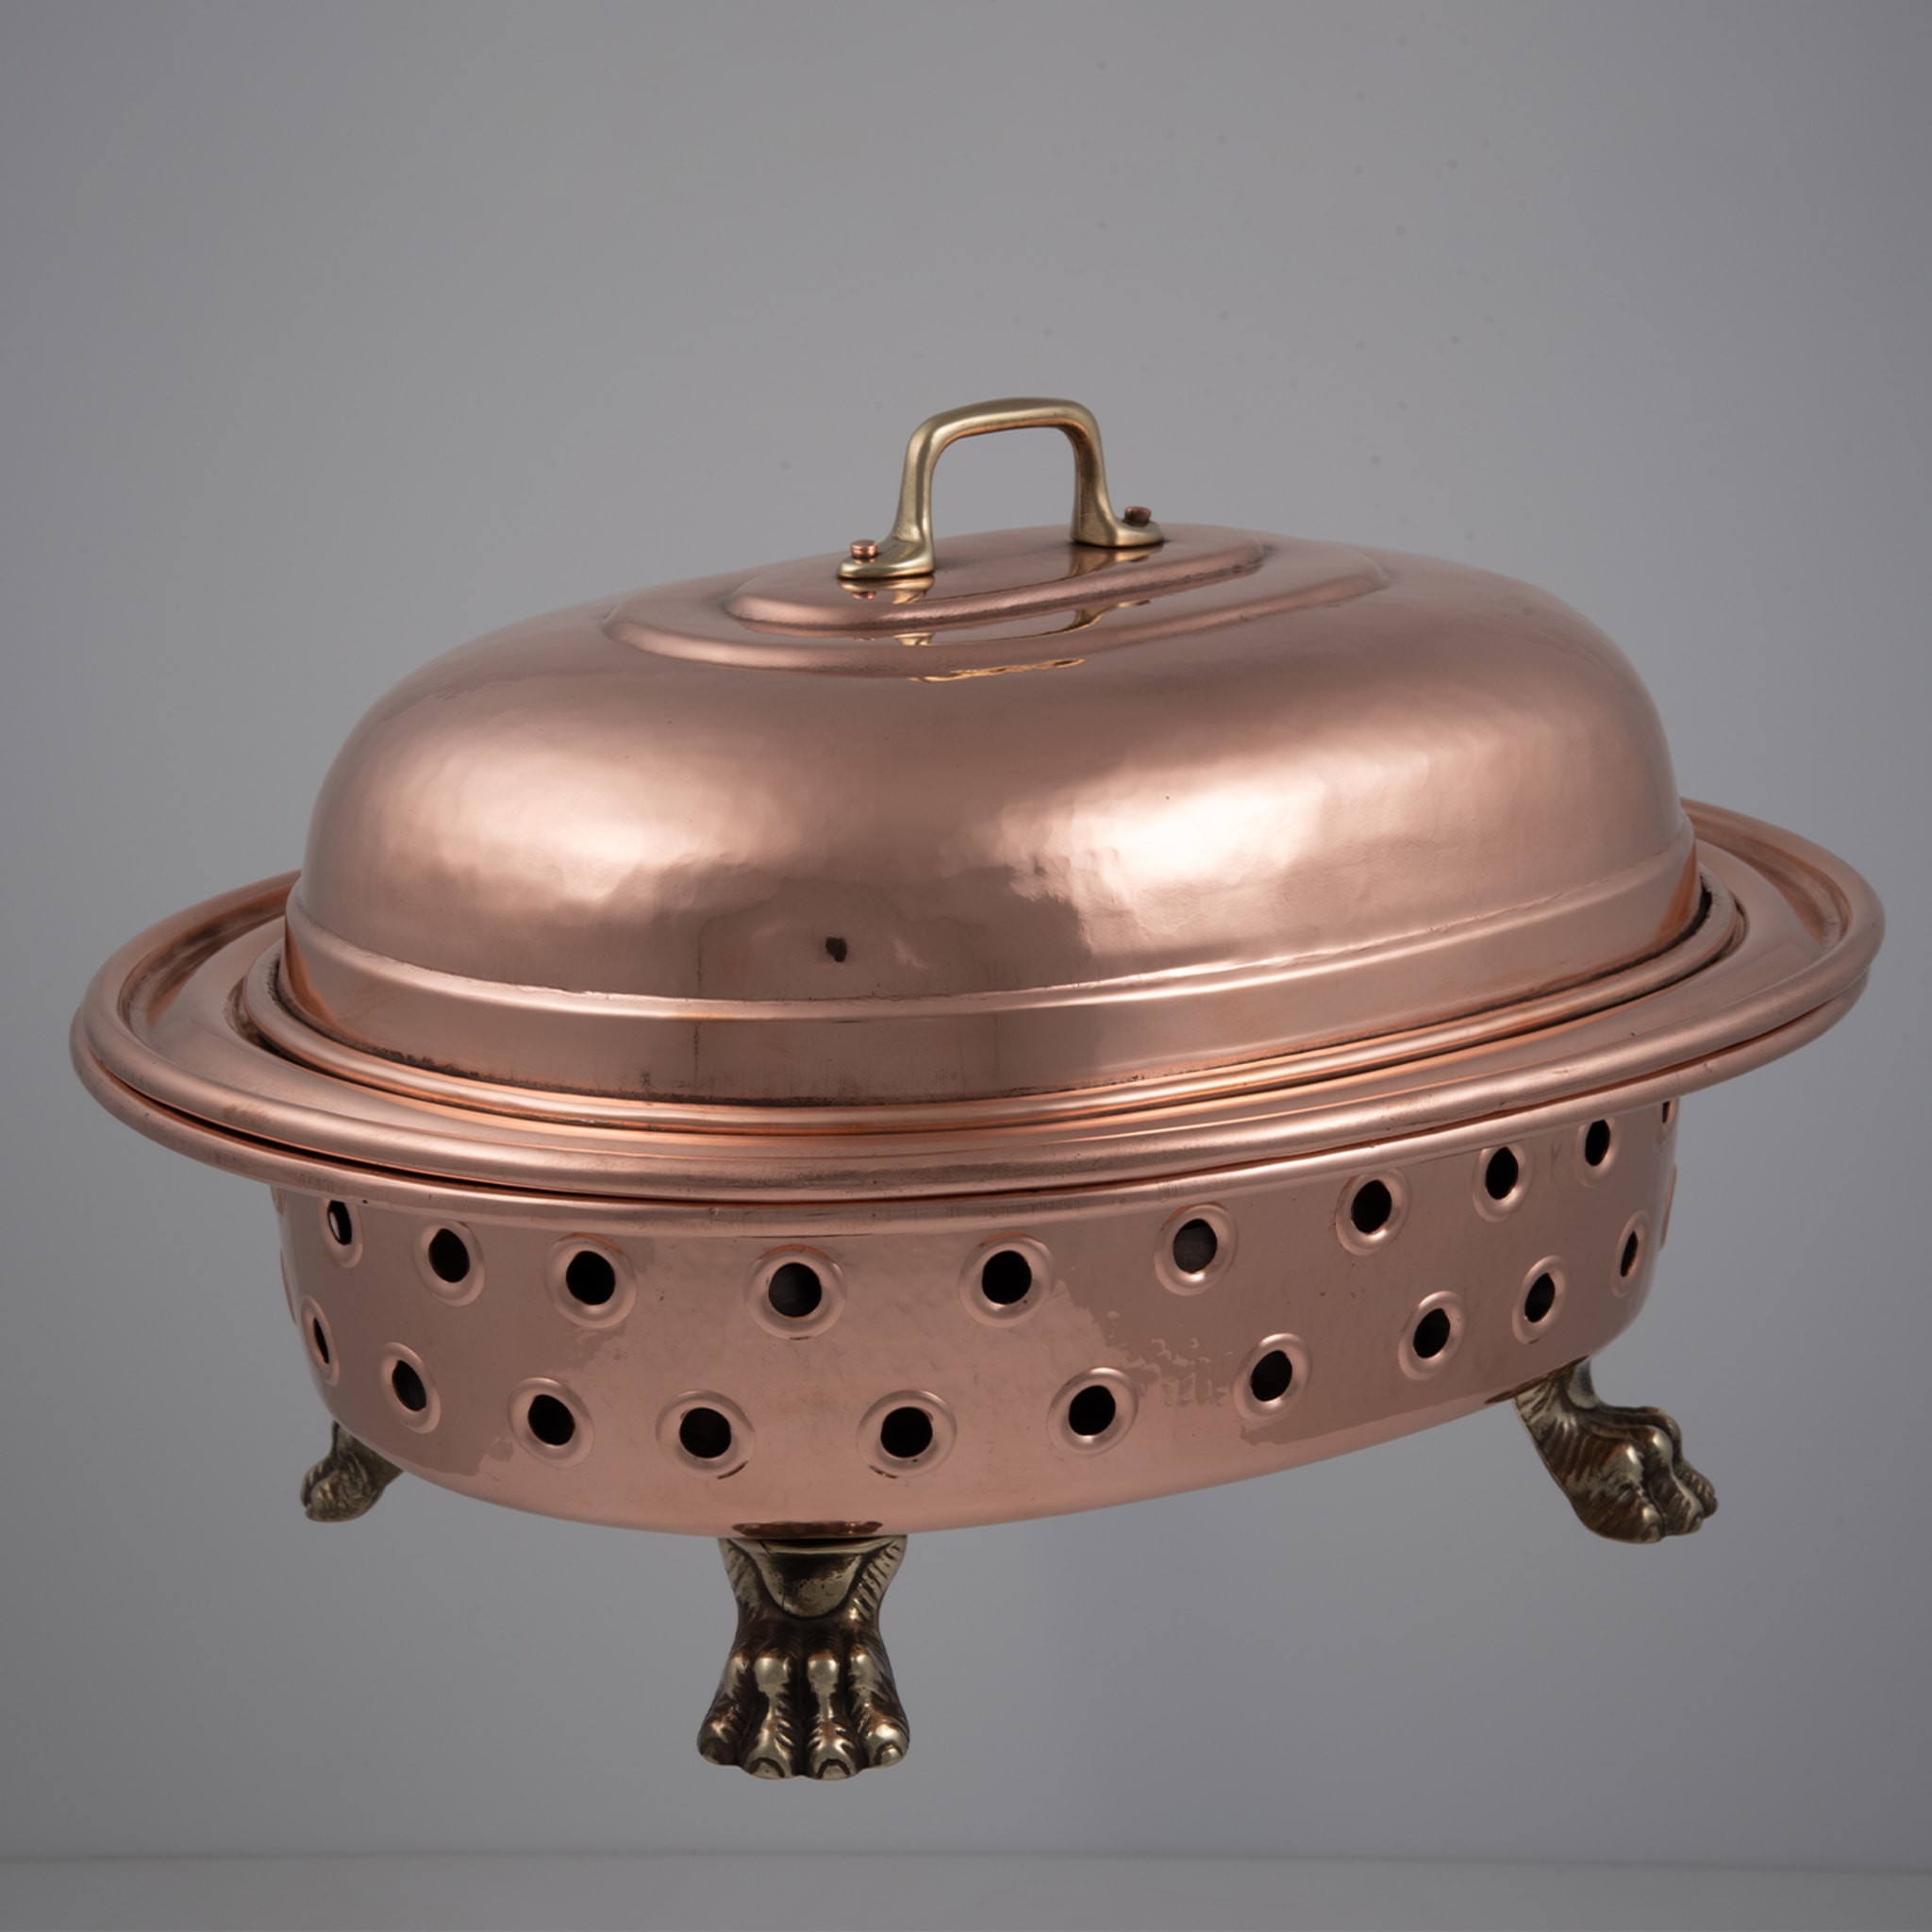 Copper Chafing Dish with Zoomorphic Feet - Alternative view 1